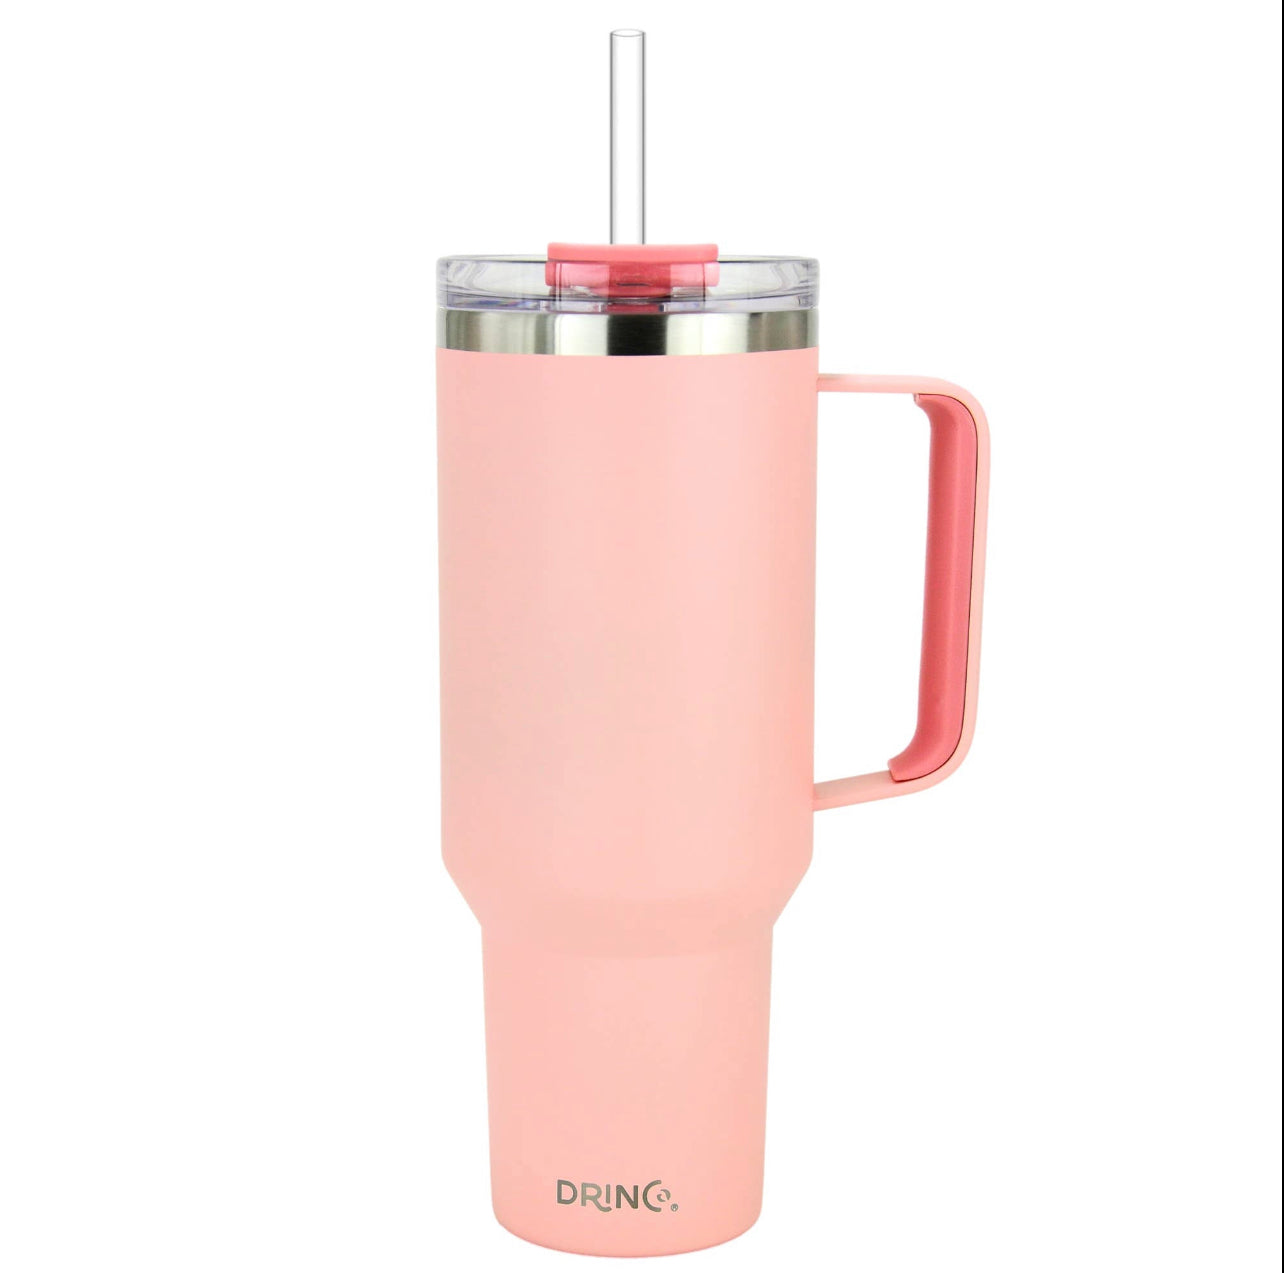 Stanley Dupe 40 oz Stainless Steel Tumbler in Peach